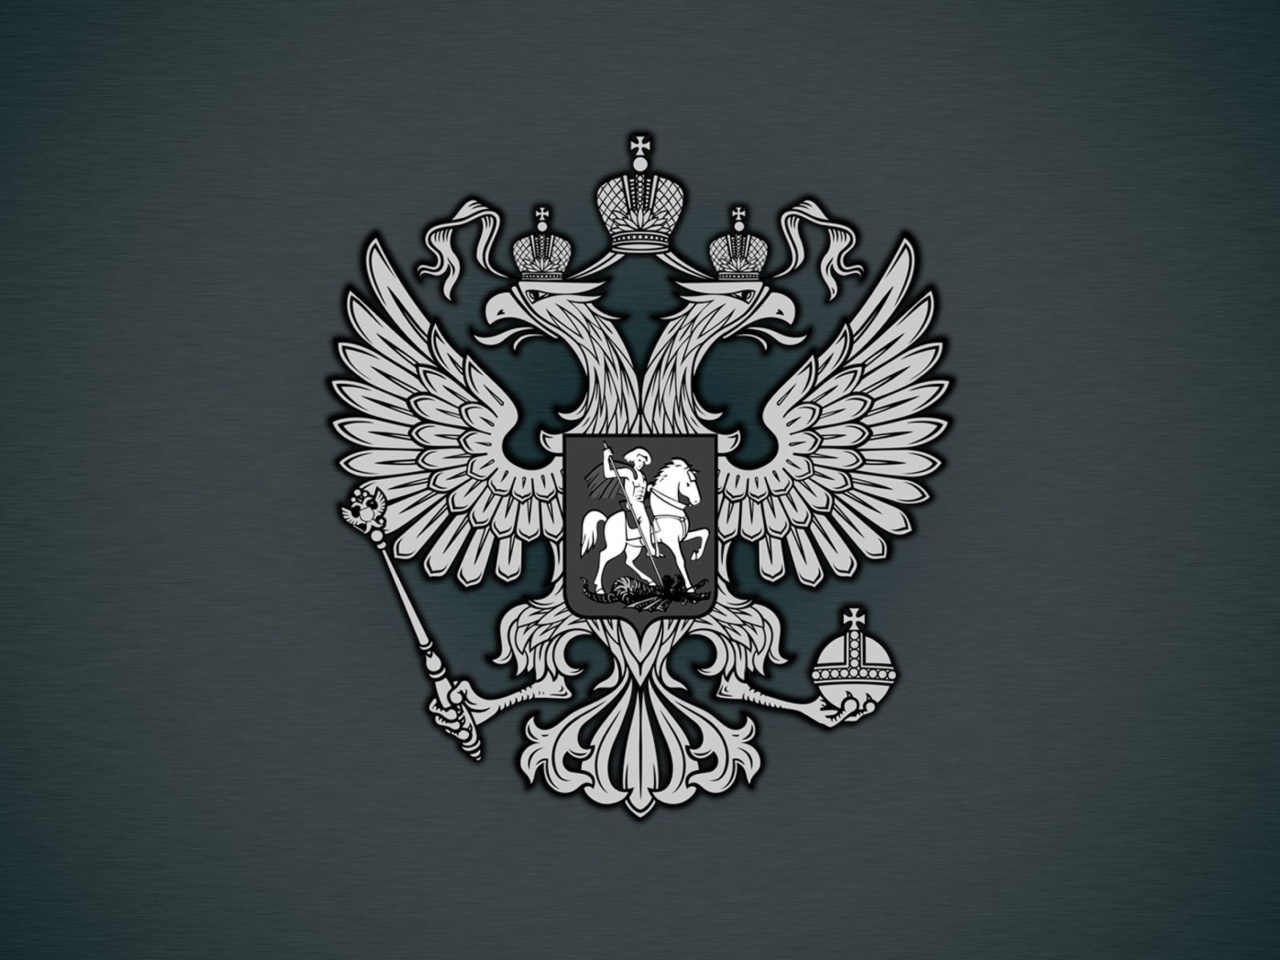 Das Coat of arms of Russia Wallpaper 1280x960